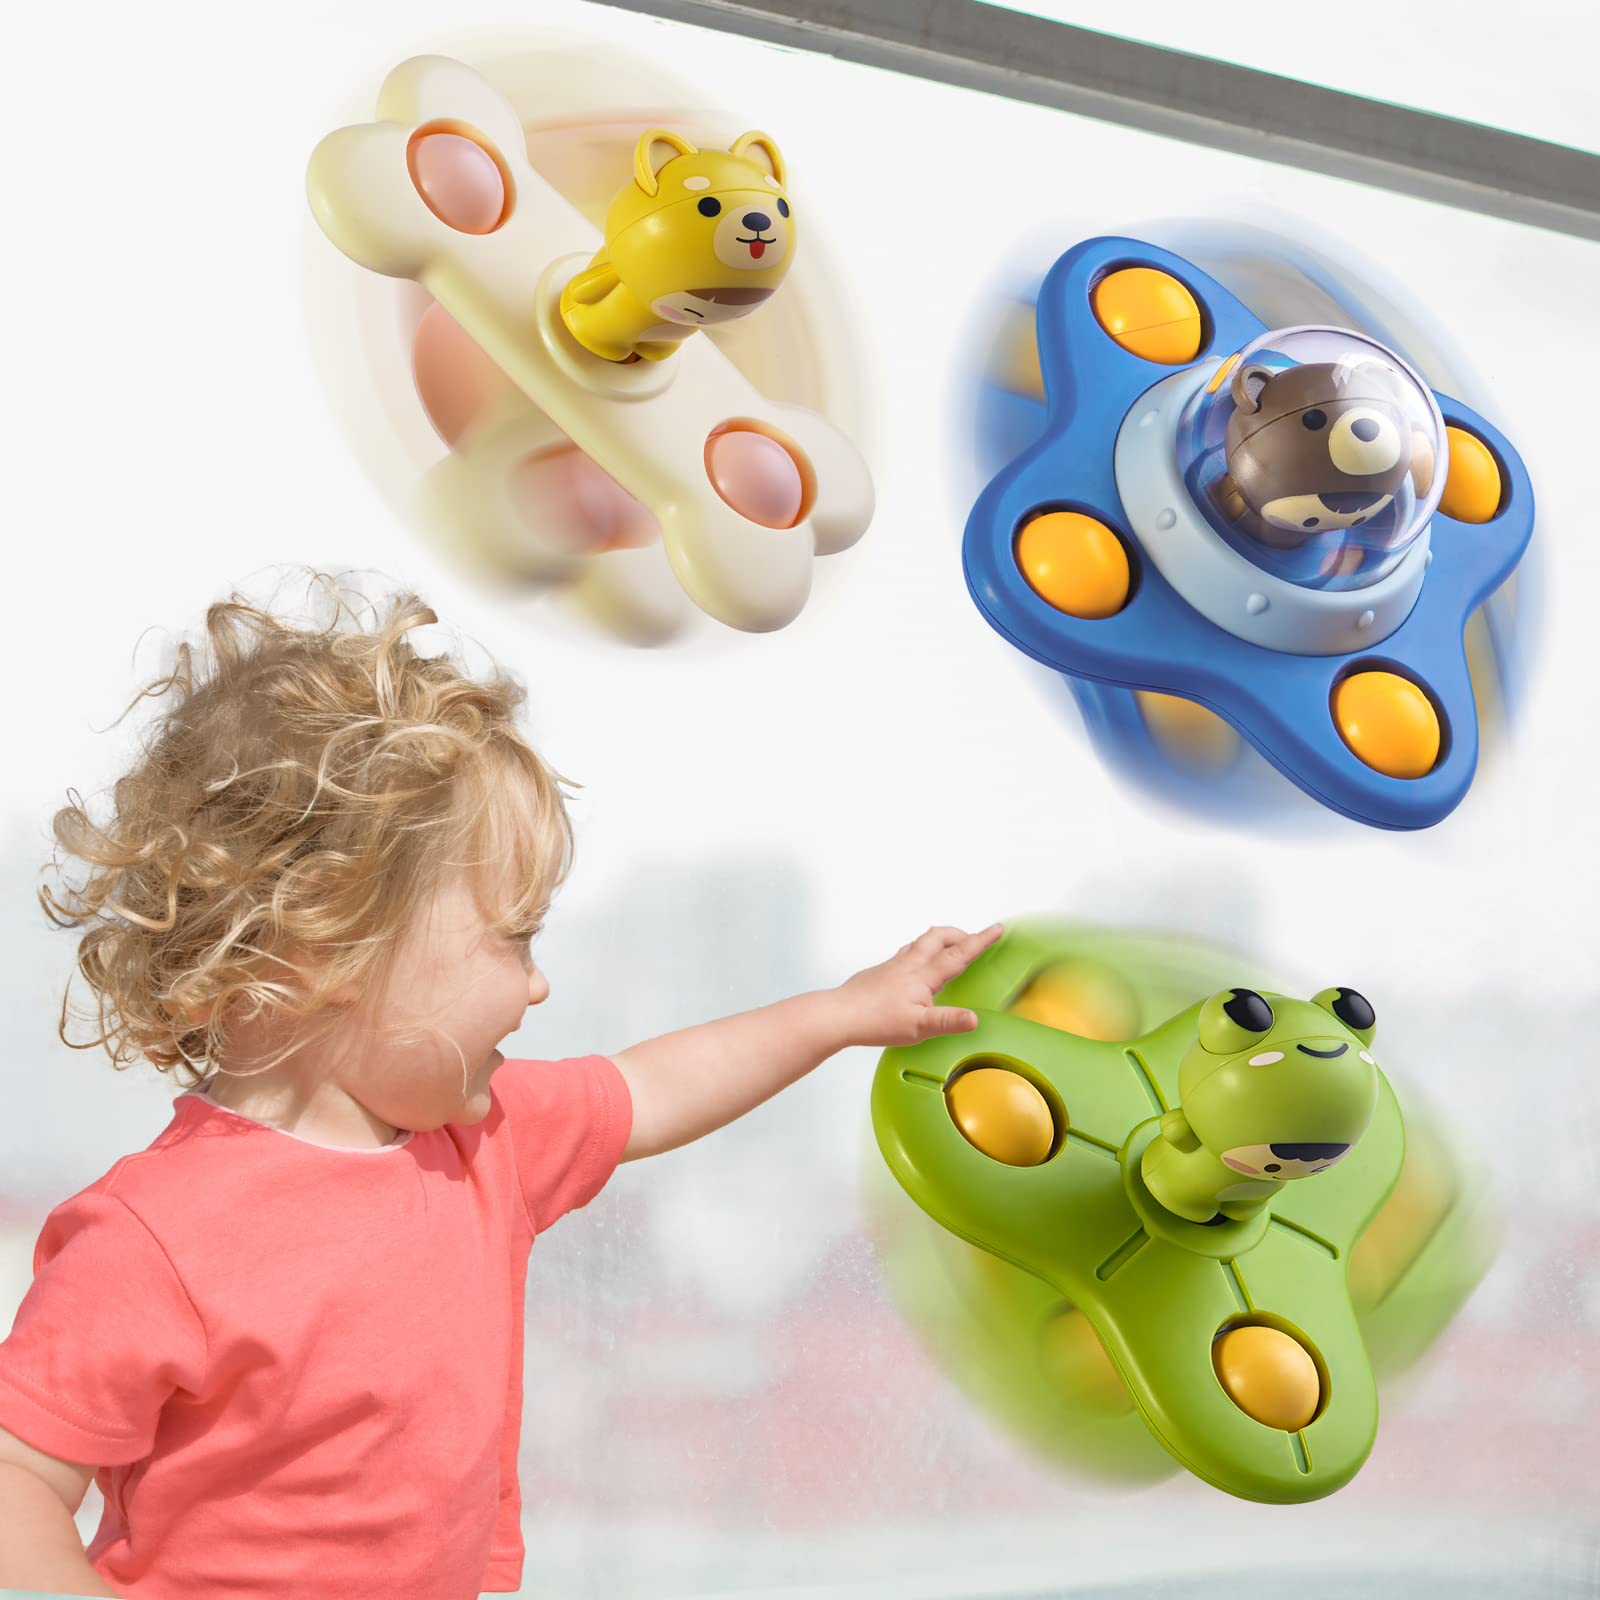 TinyToy™ Suction cup spinner